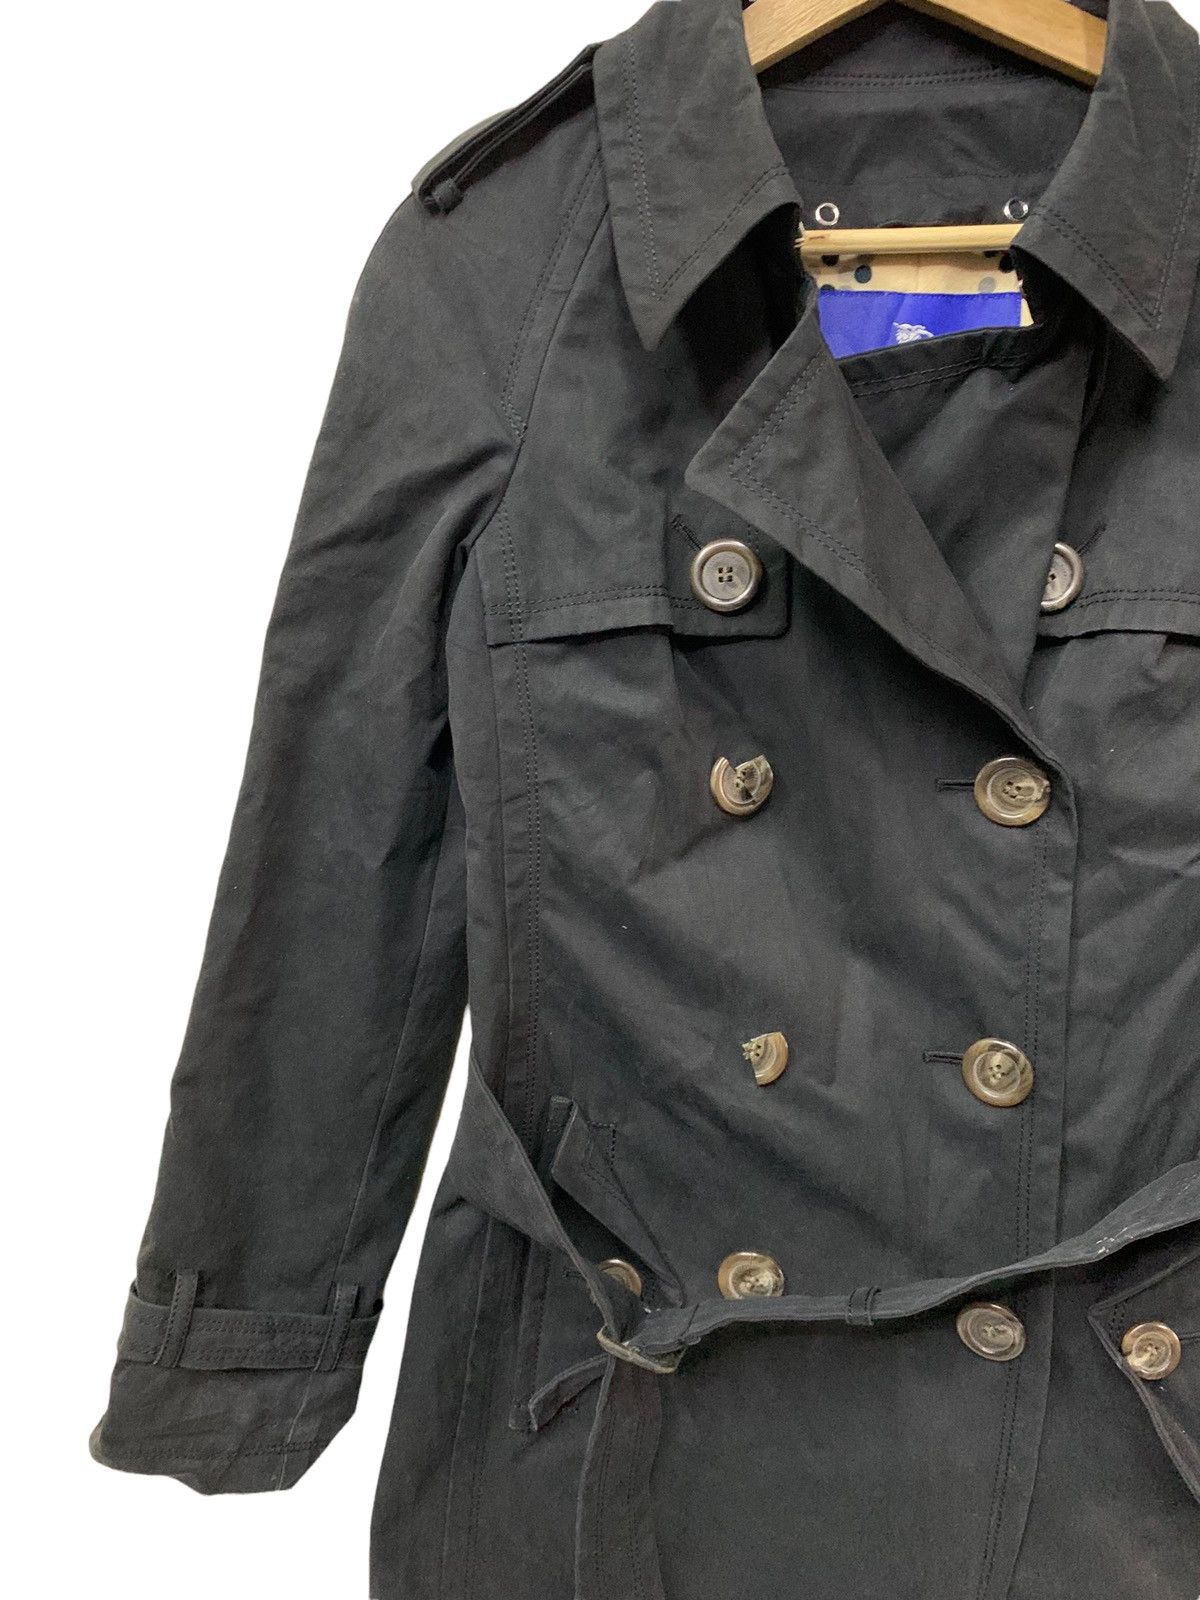 🔥BURBERRY BLUE LABEL WOOL CHERRY LINED TRENCH COAT - 8